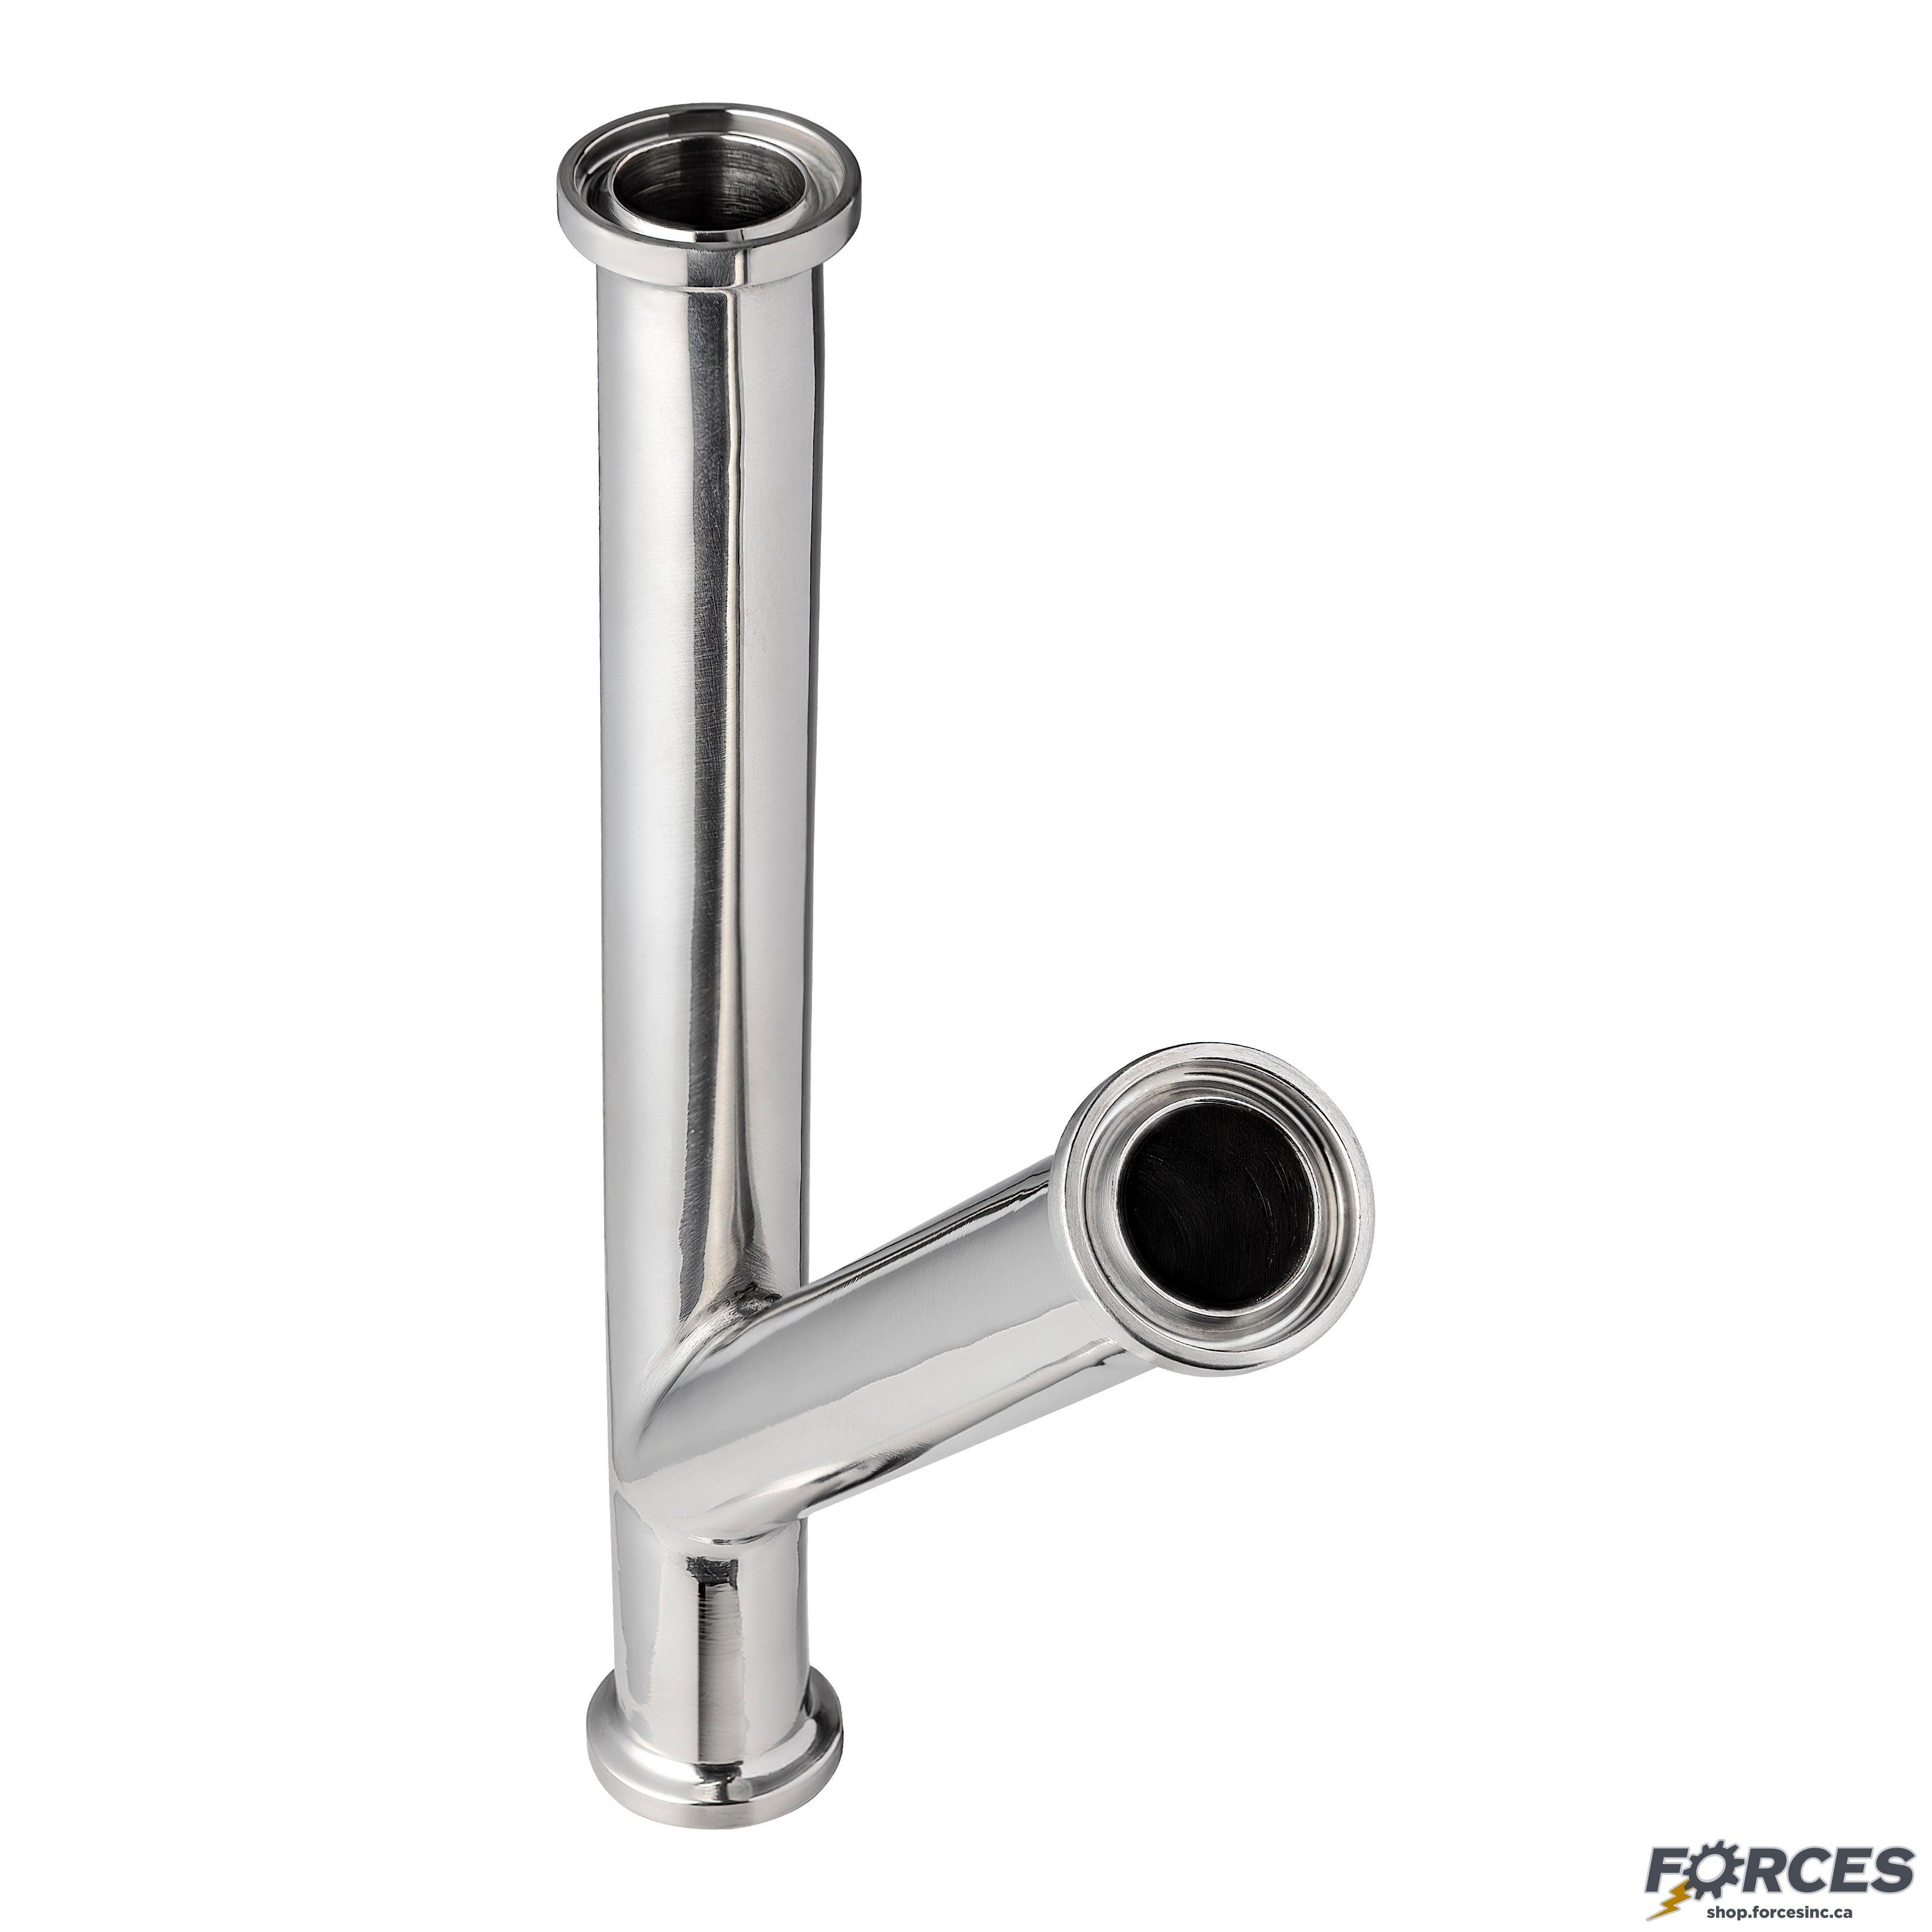 3/4" Tri-Clamp 45° Lateral Wye - Stainless Steel 316 - Forces Inc